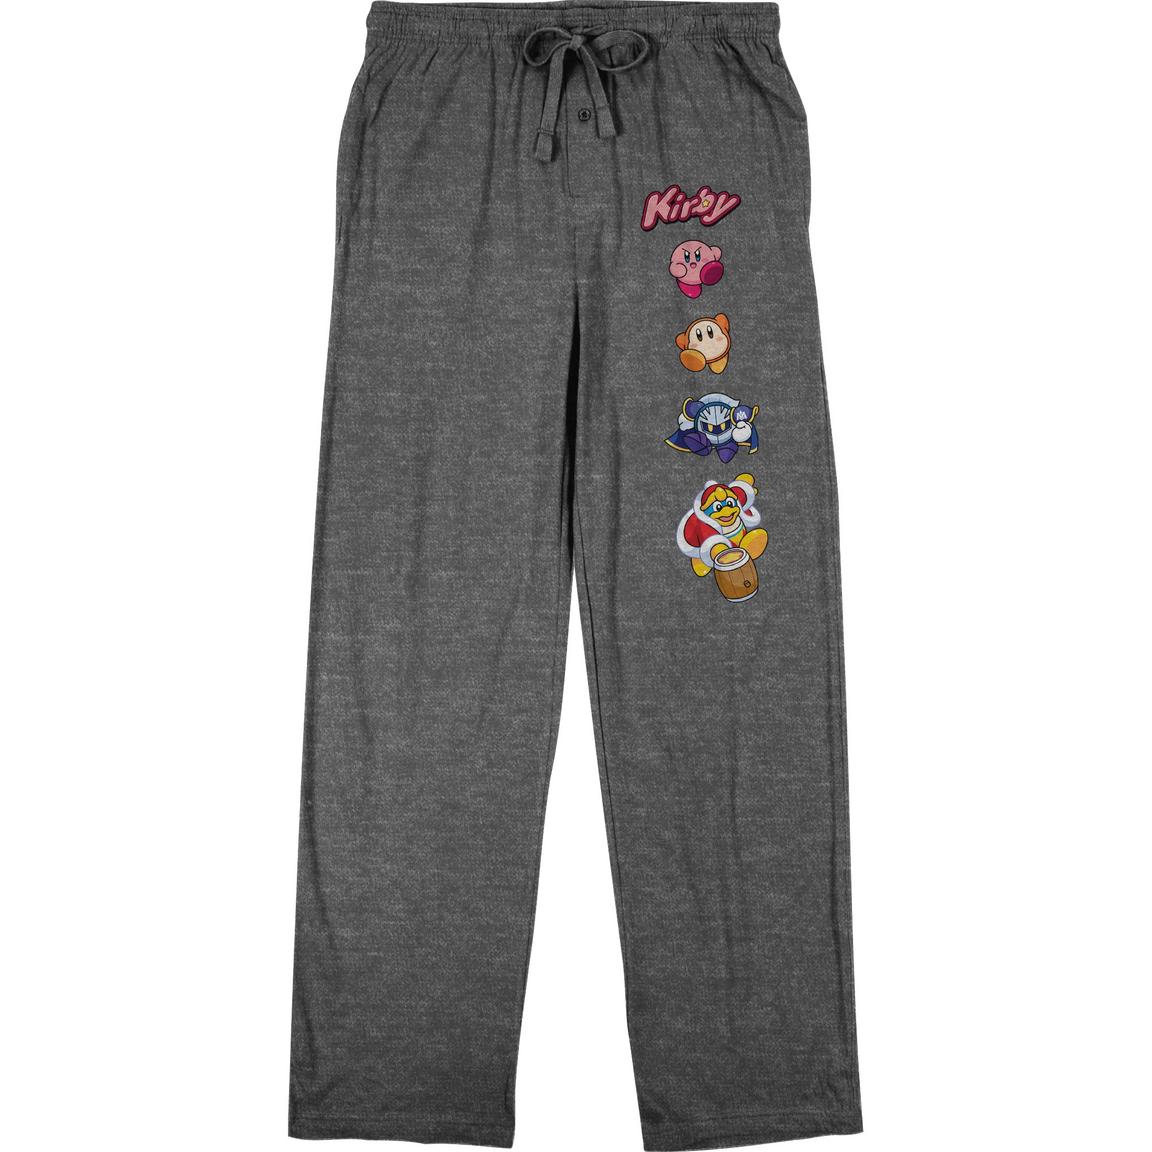 Kirby Classic Video Game Men's Athletic Heather Gray Pajama Pants, Size: Large, Bioworld Merchandising